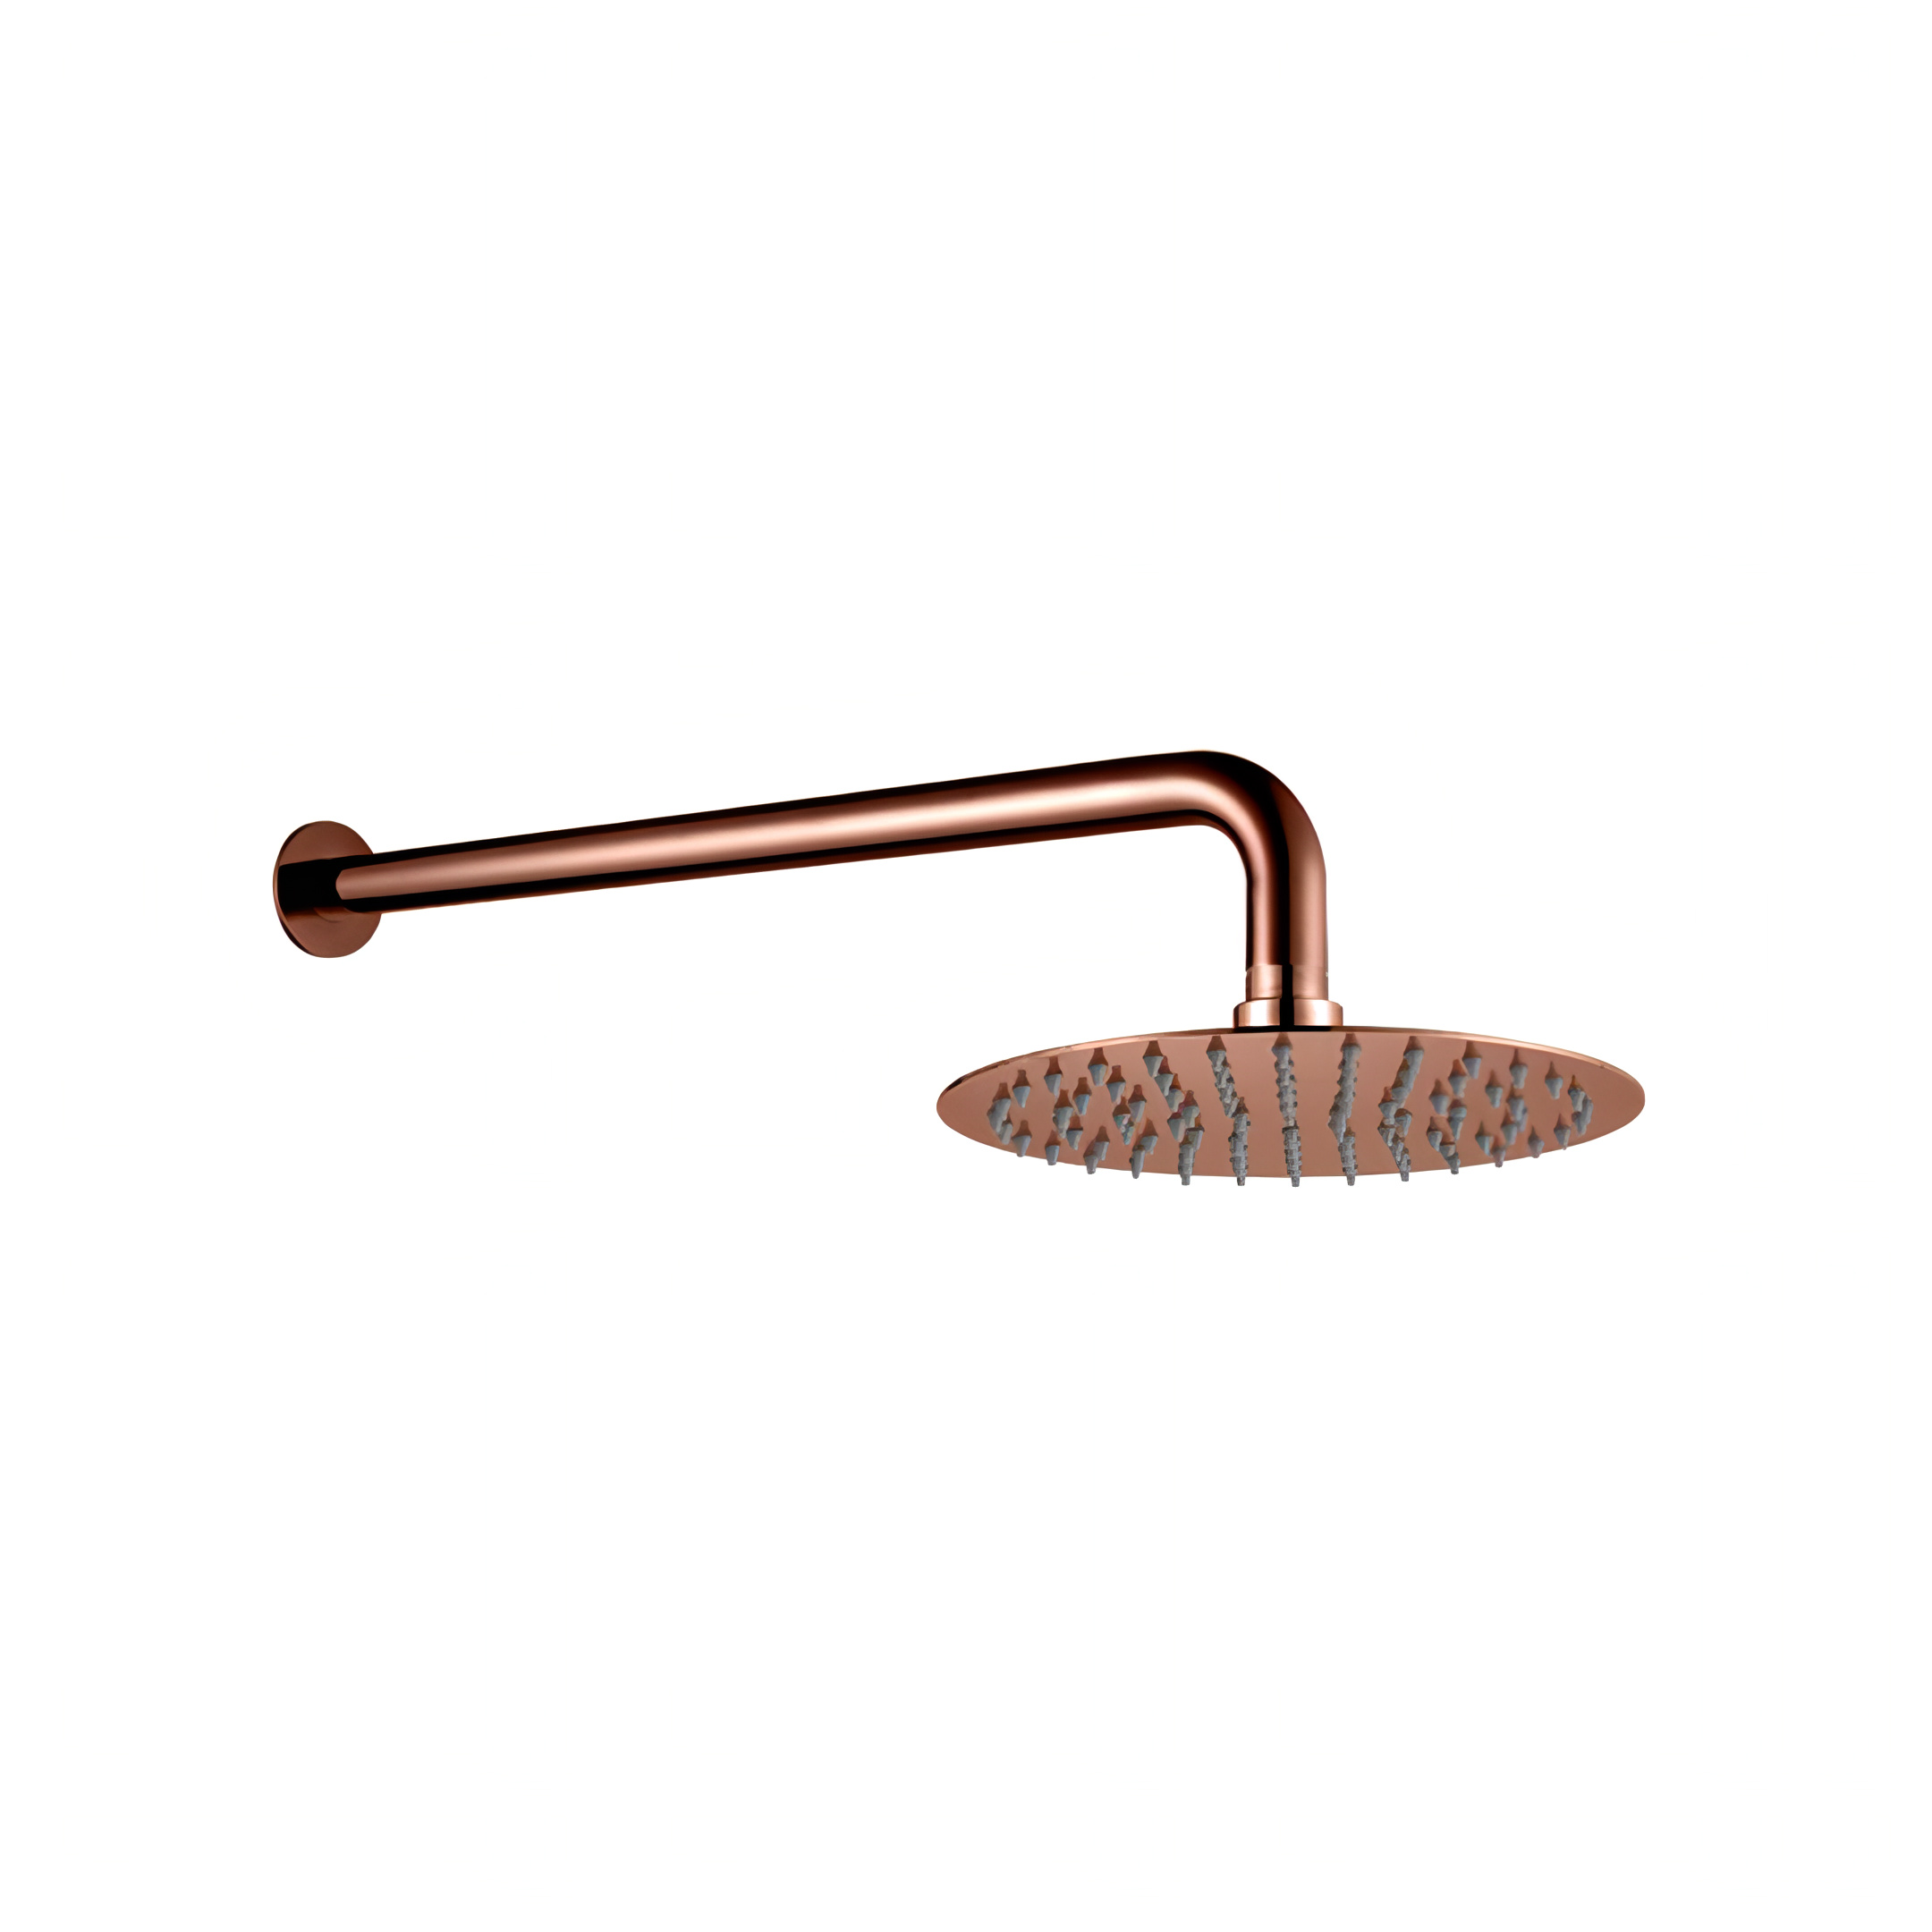 HELLYCAR CHRIS WALL SHOWER ARM AND SHOWER HEAD ROSE GOLD 200MM